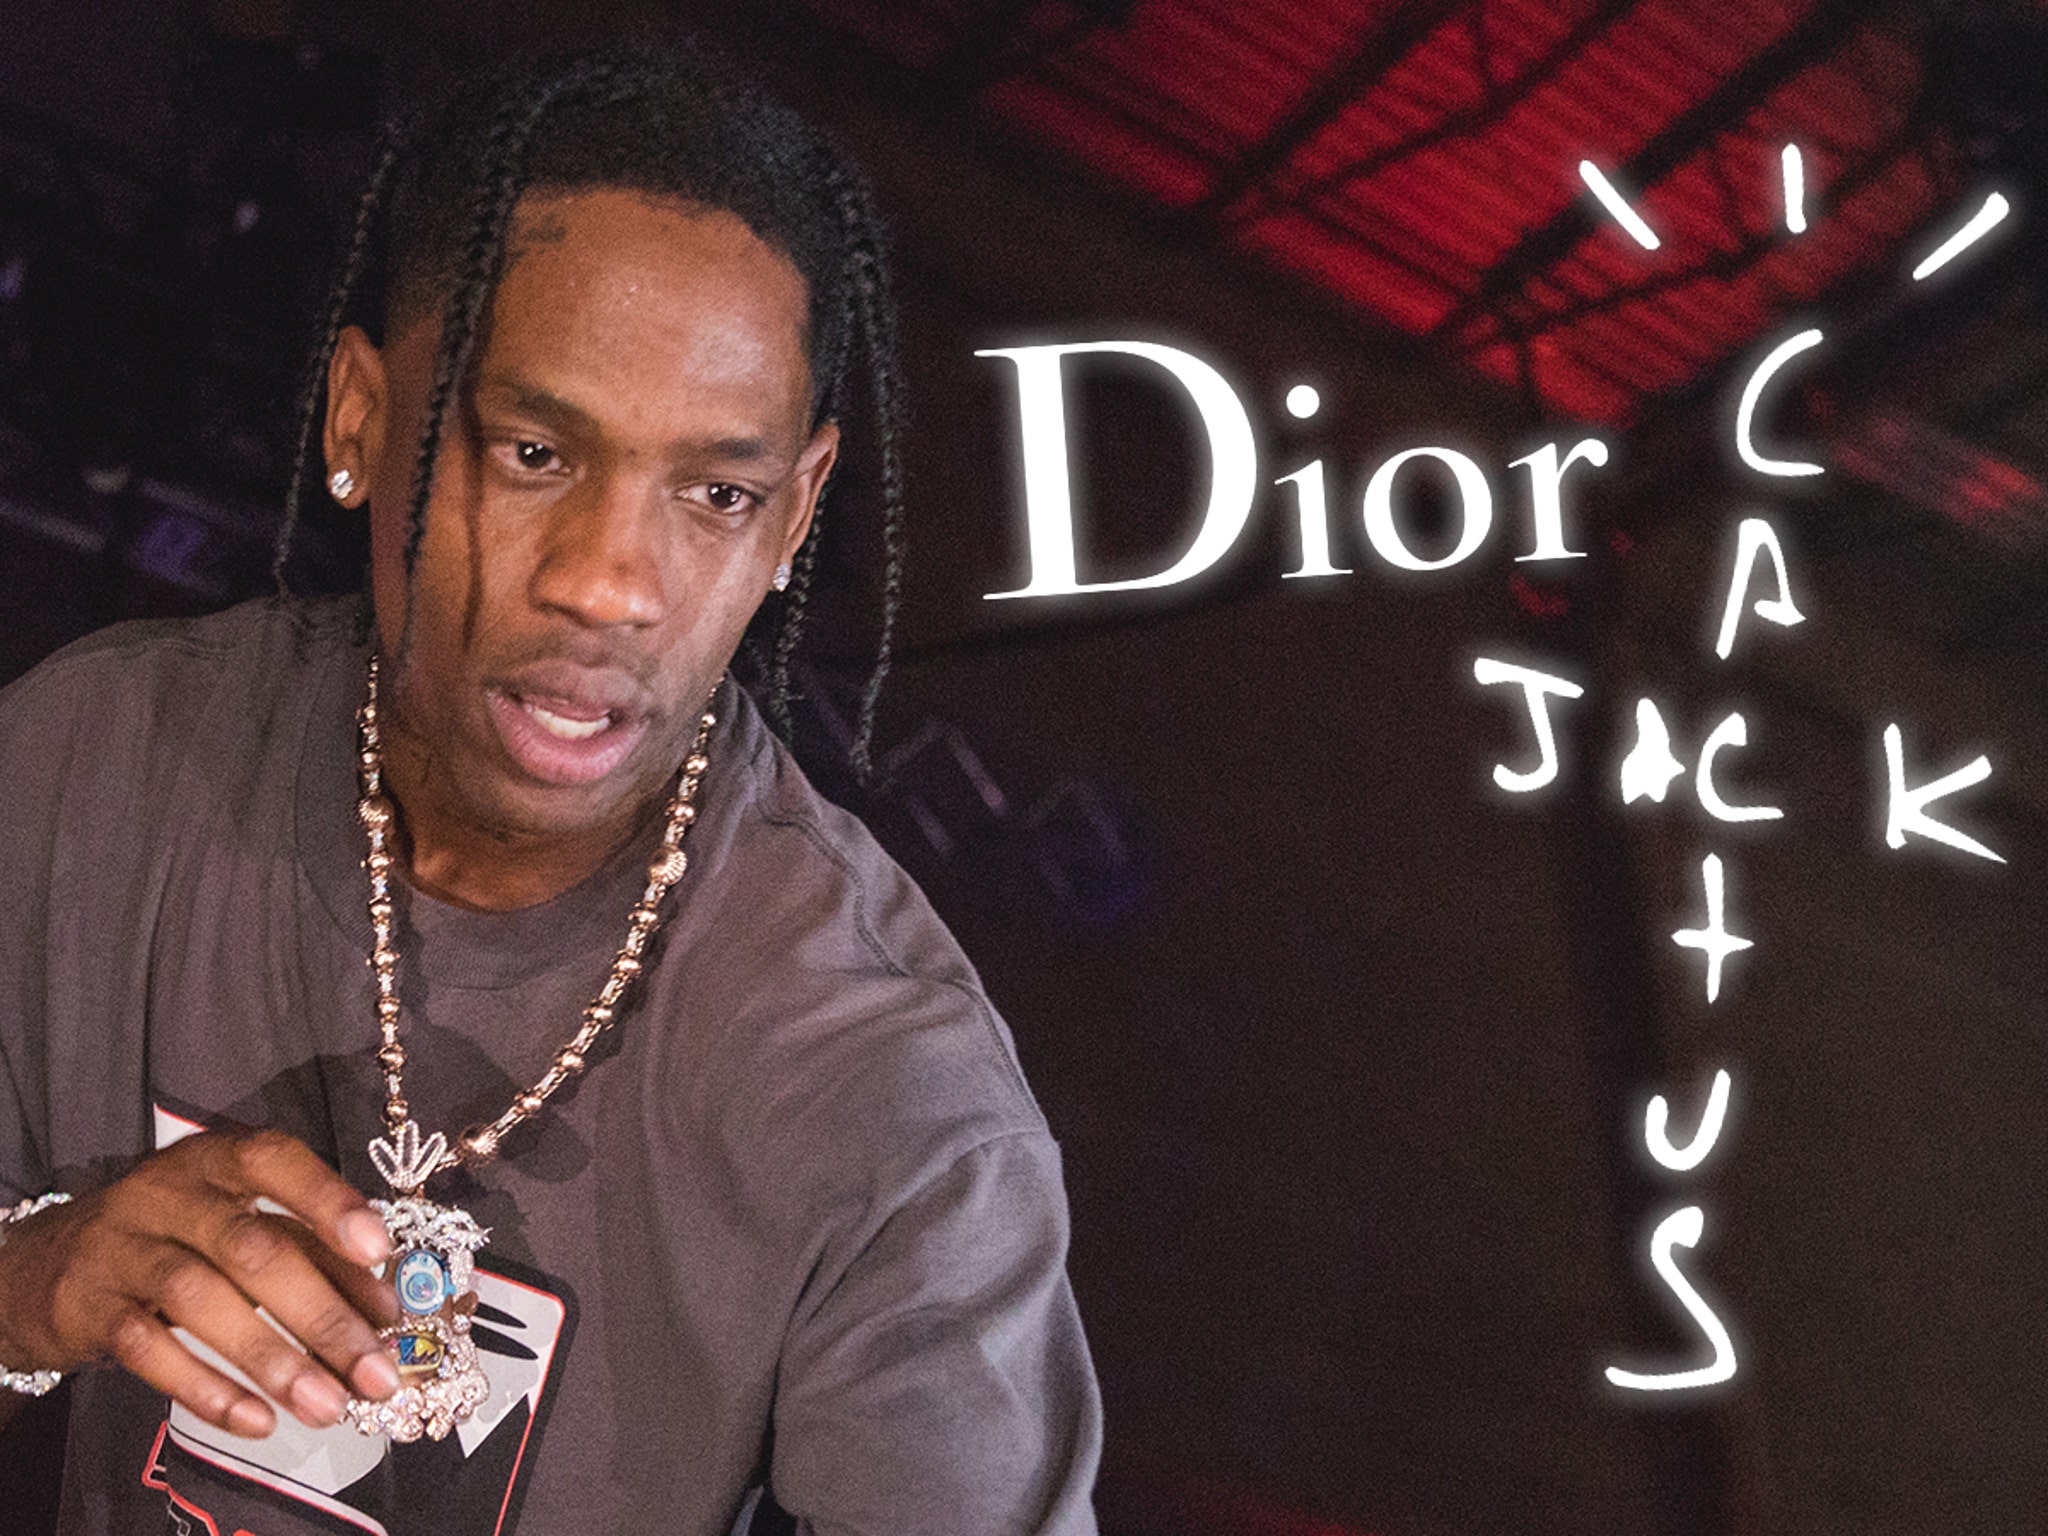 Travis Scott Cactus Jack Partnership with Dior On Hold After Astroworld